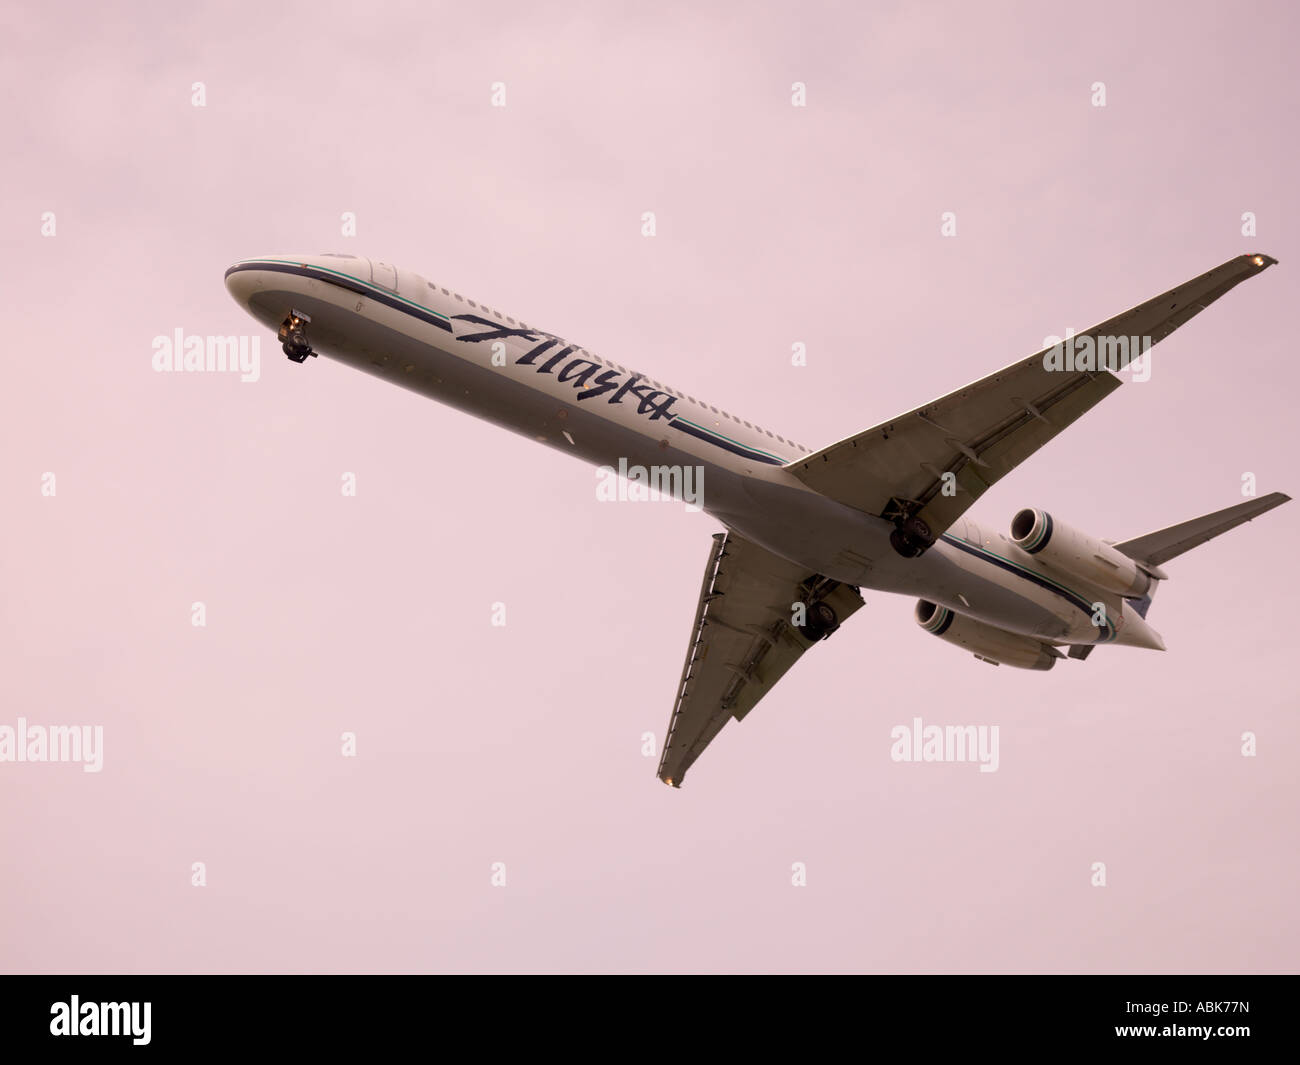 Alaska Airlines MD 80 landing at Ted Stevens Anchorage International Airport Stock Photo